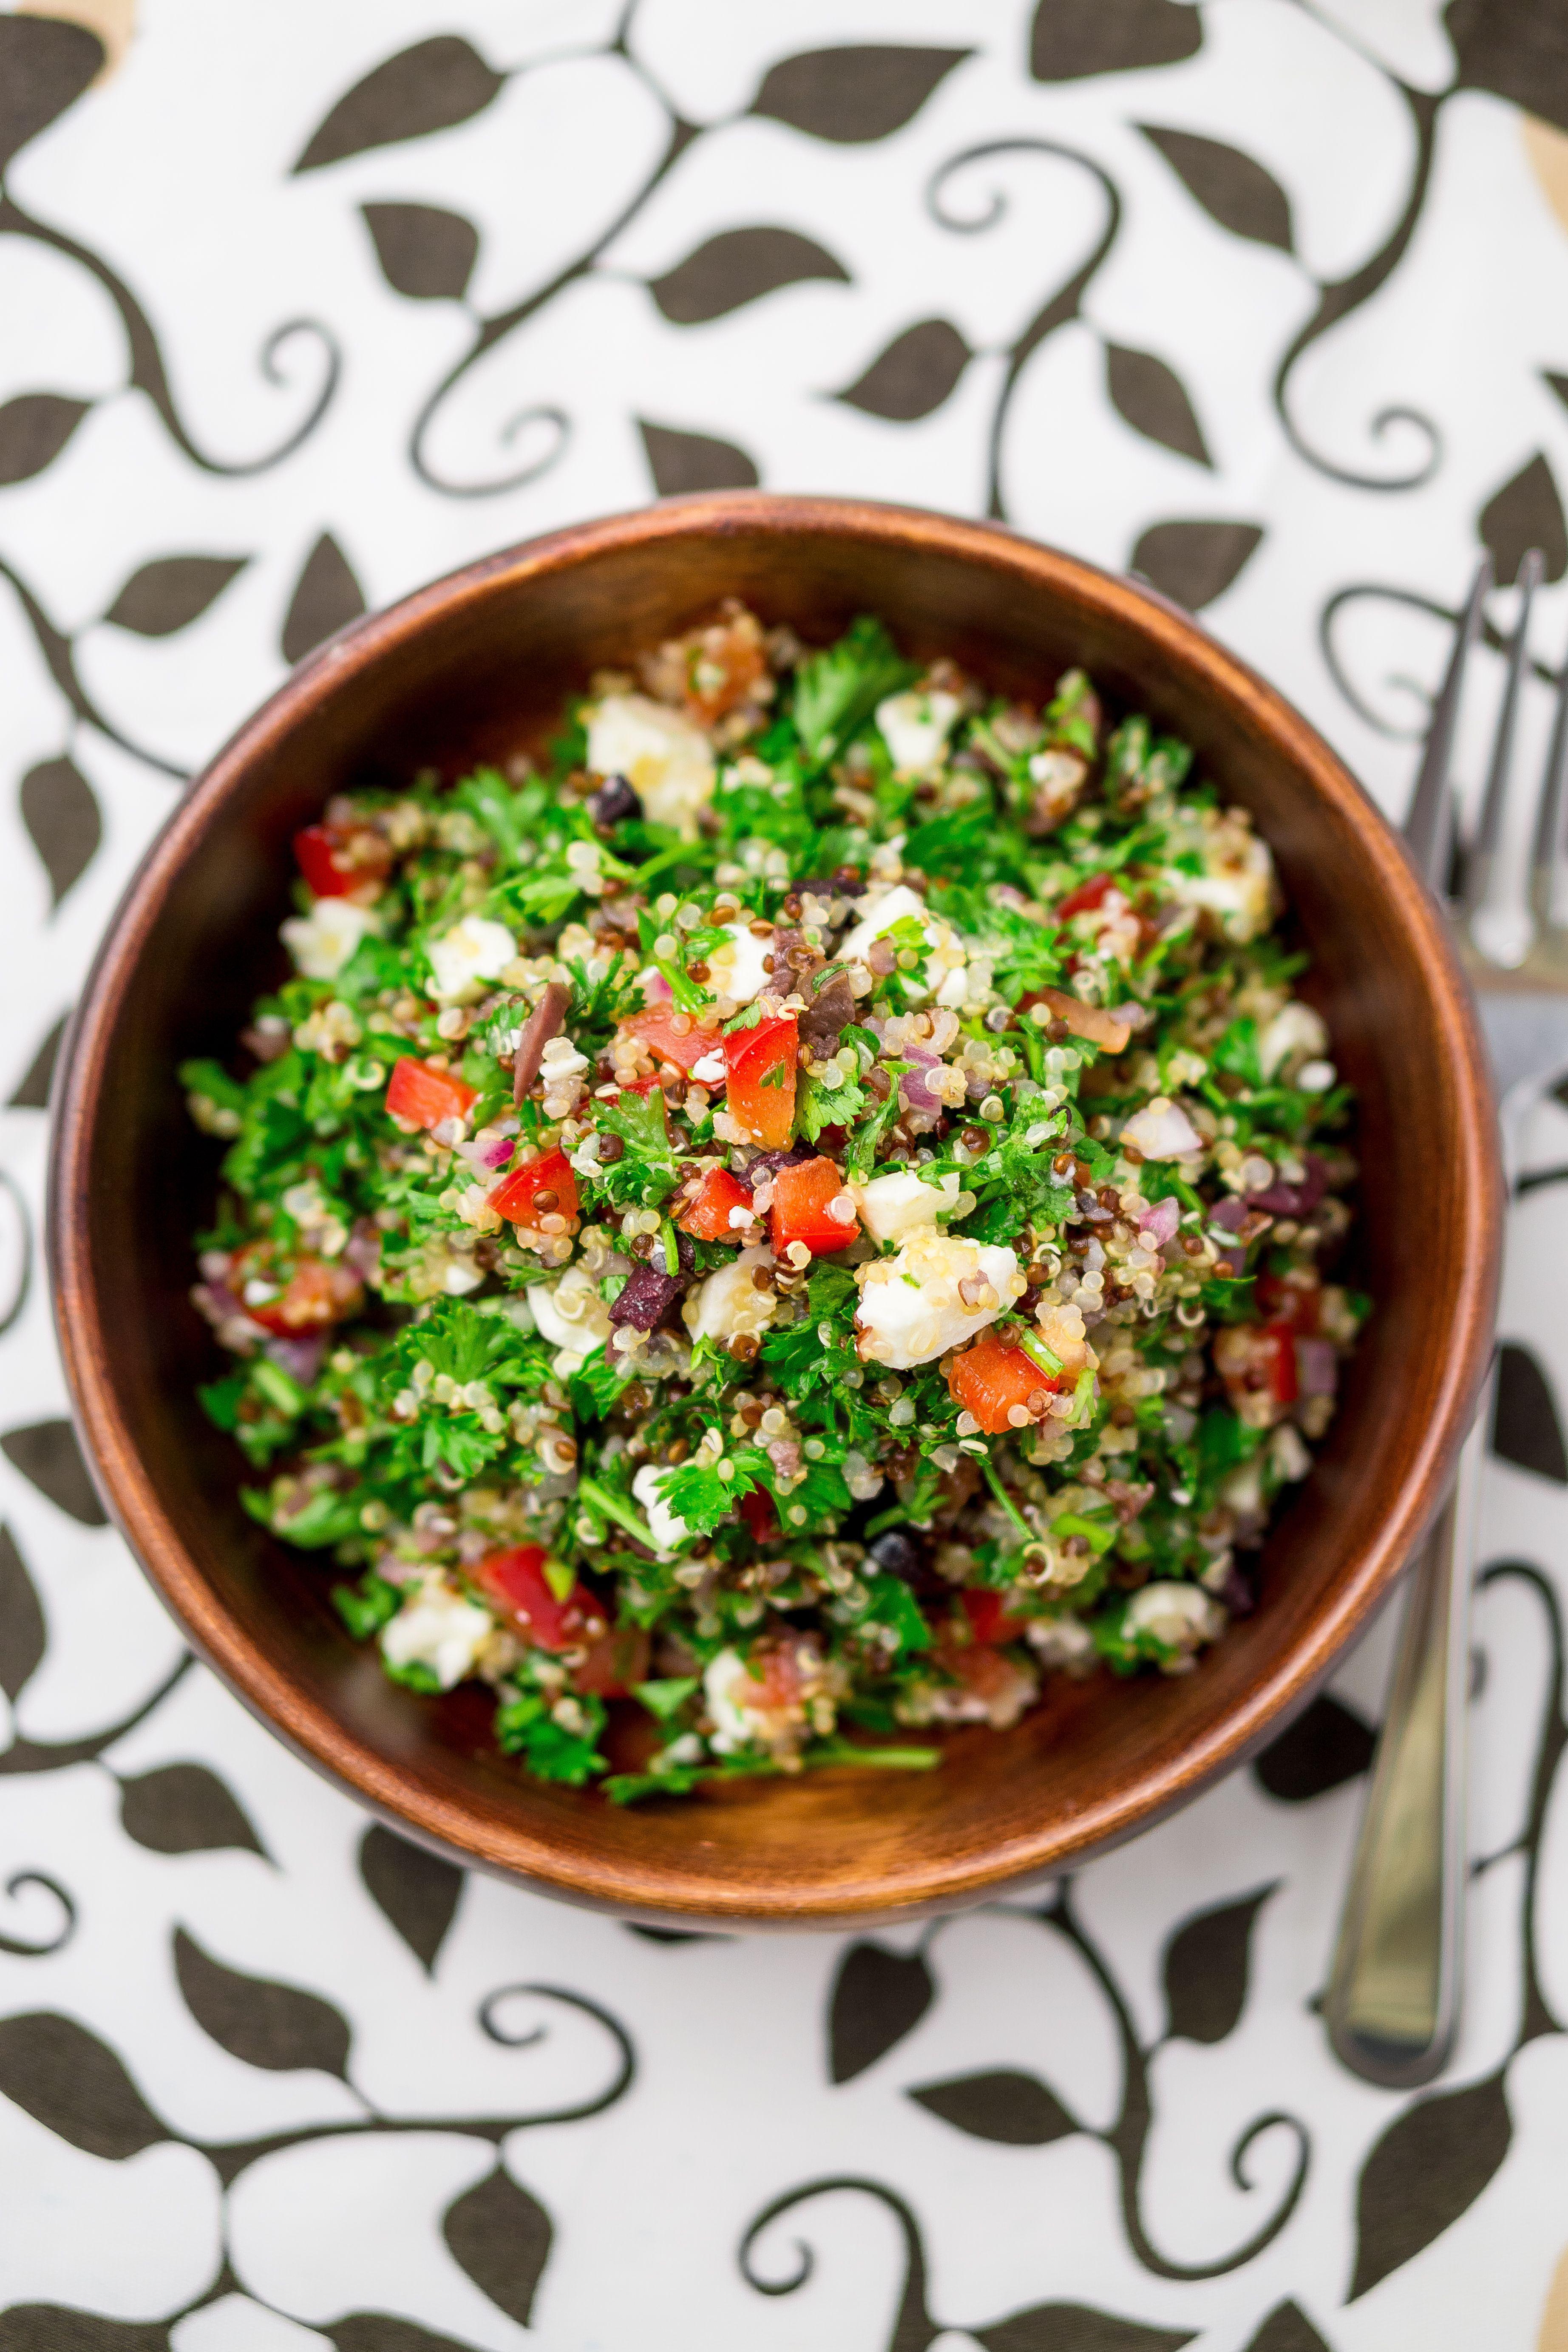 Grilled buckwheat salad with vegetablesimage